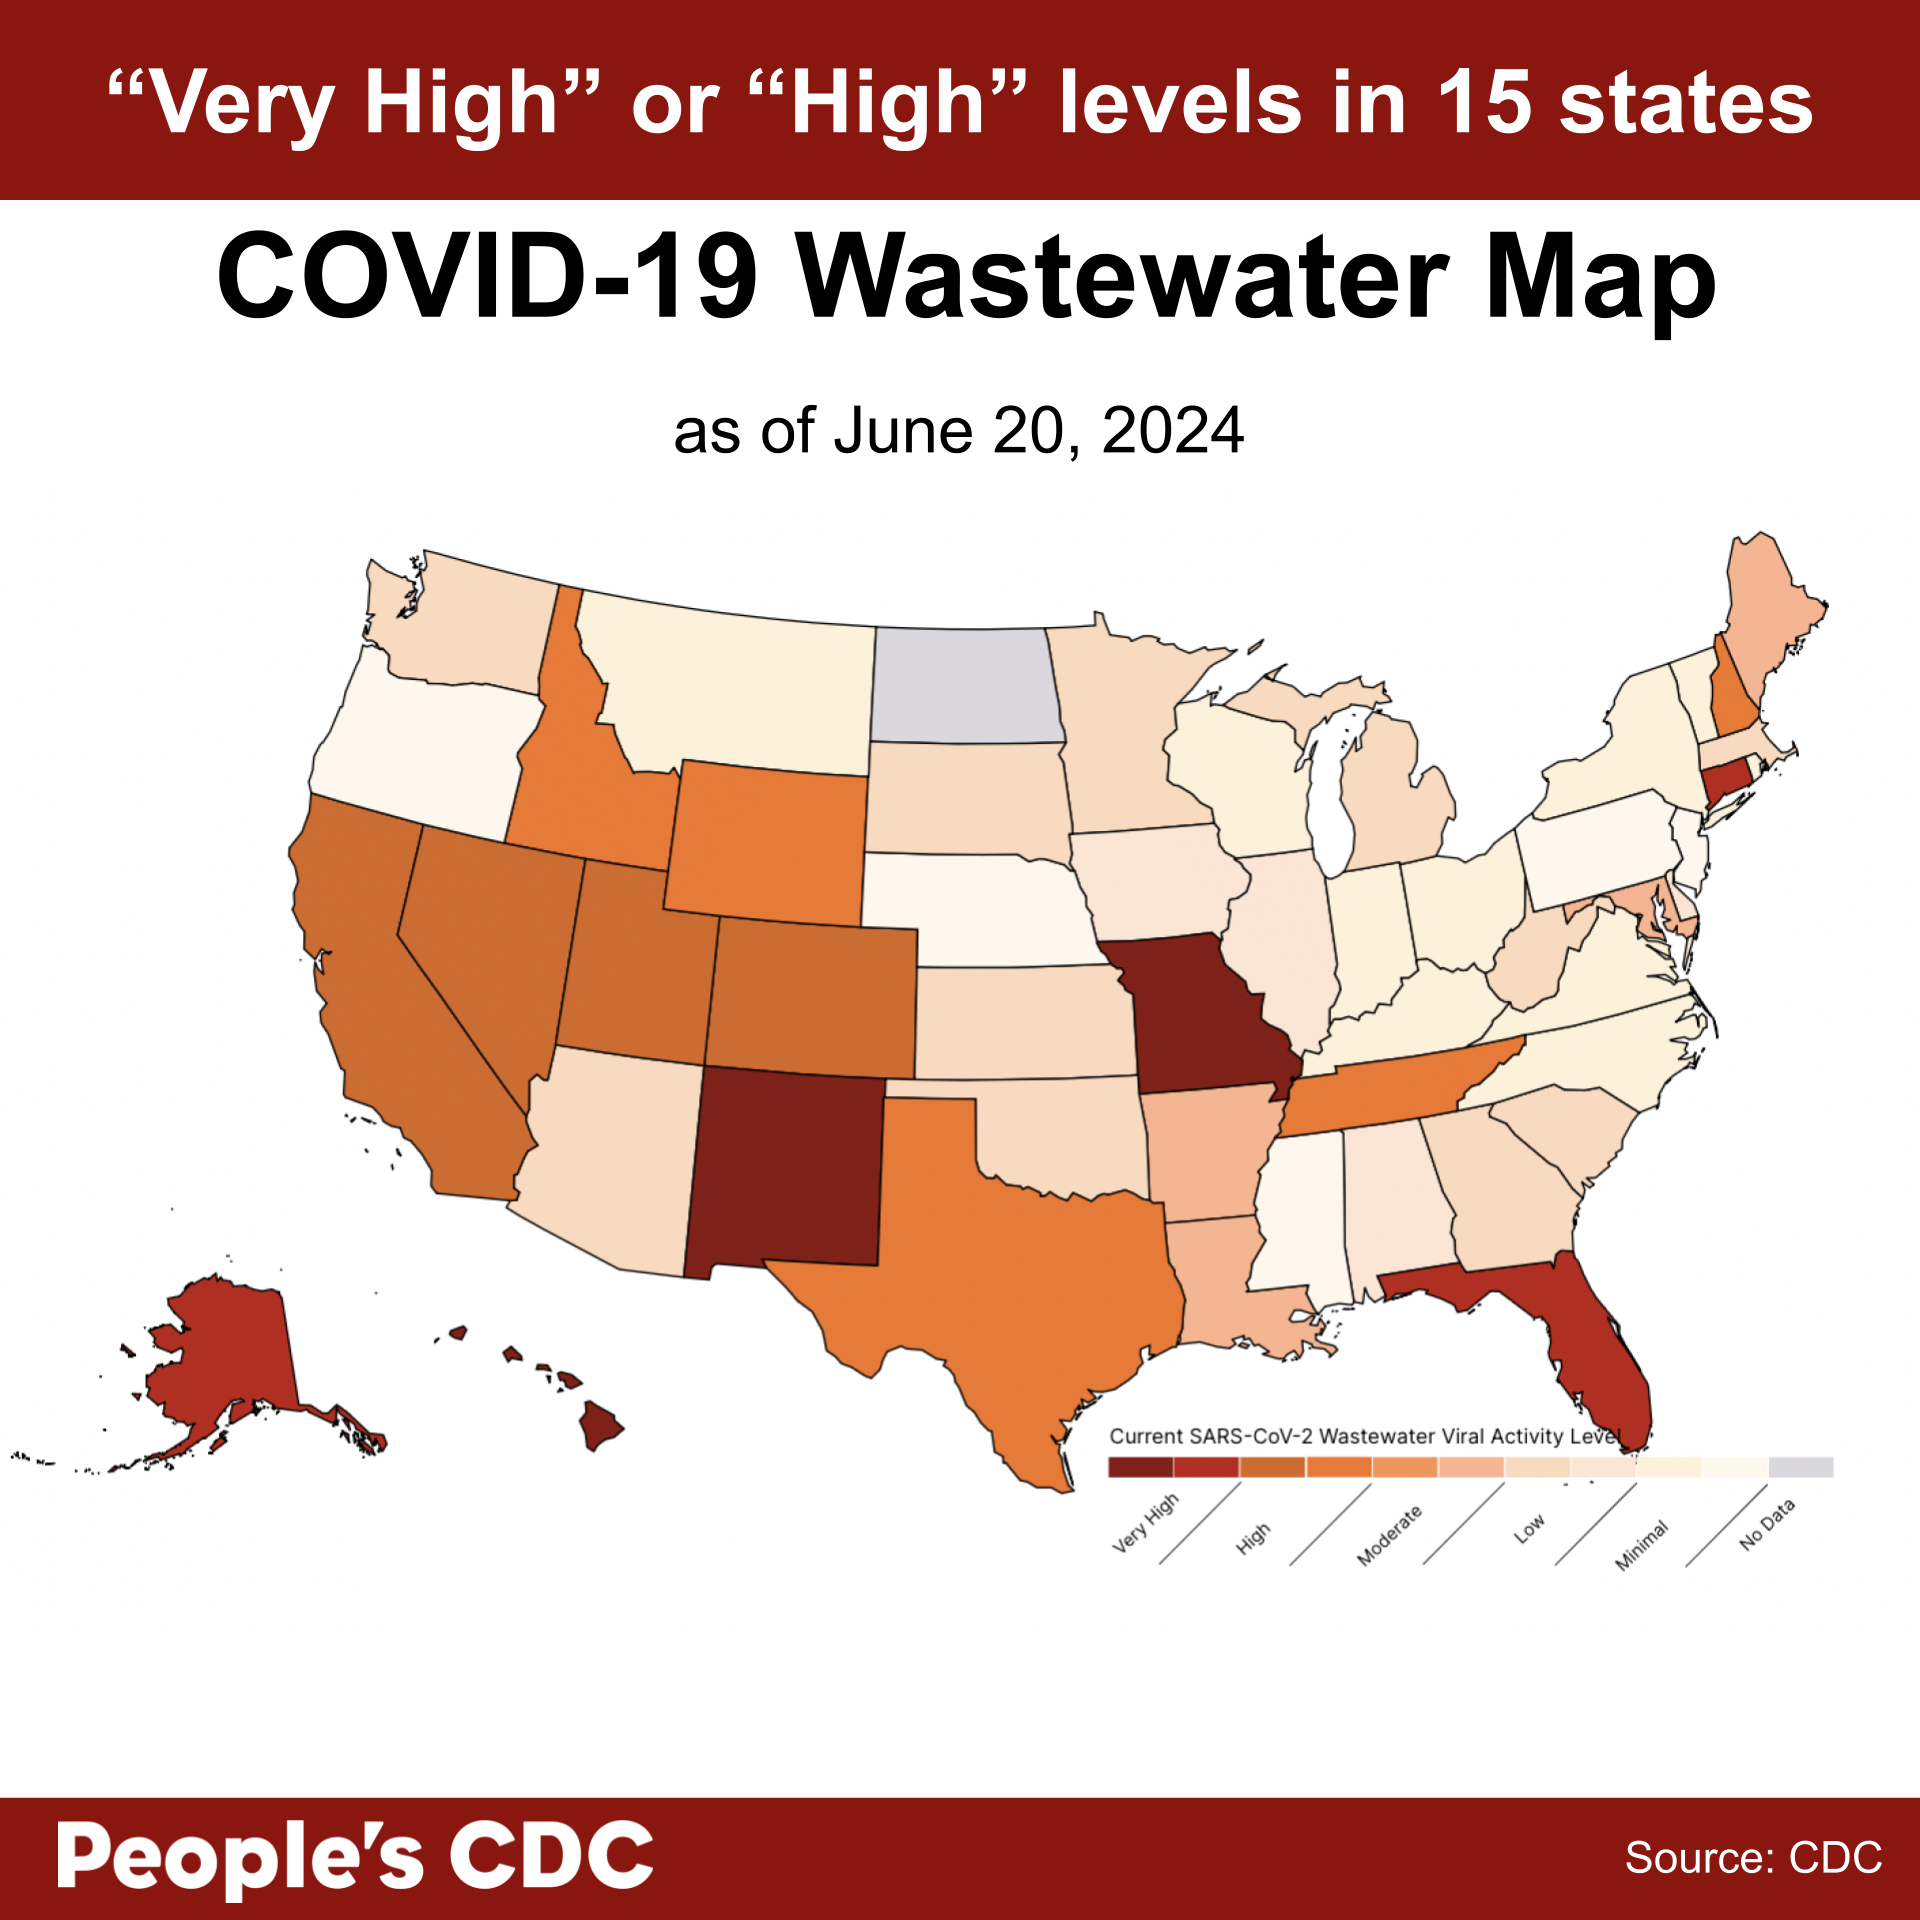 A map of the United States color-coded in shades of orange and gray displaying SARS-CoV-2 Wastewater Viral Activity level as of June 20, 2024, where deeper tones correlate to higher viral activity and gray indicates “Insufficient,” or “No Data.” Viral activity is “Very High” in New Mexico, Missouri, Rhode Island, Florida, Hawaii, and Alaska. Viral activity is “High” in the majority of the Western United States. Wastewater levels are “Moderate” in 5 states and “Low” or “Minimal” in other reporting states and territories, with no data available from 2 states and 3 territories. Text above map reads “”Very High " or"High" levels in 15 states. People’s CDC. Source: CDC.”